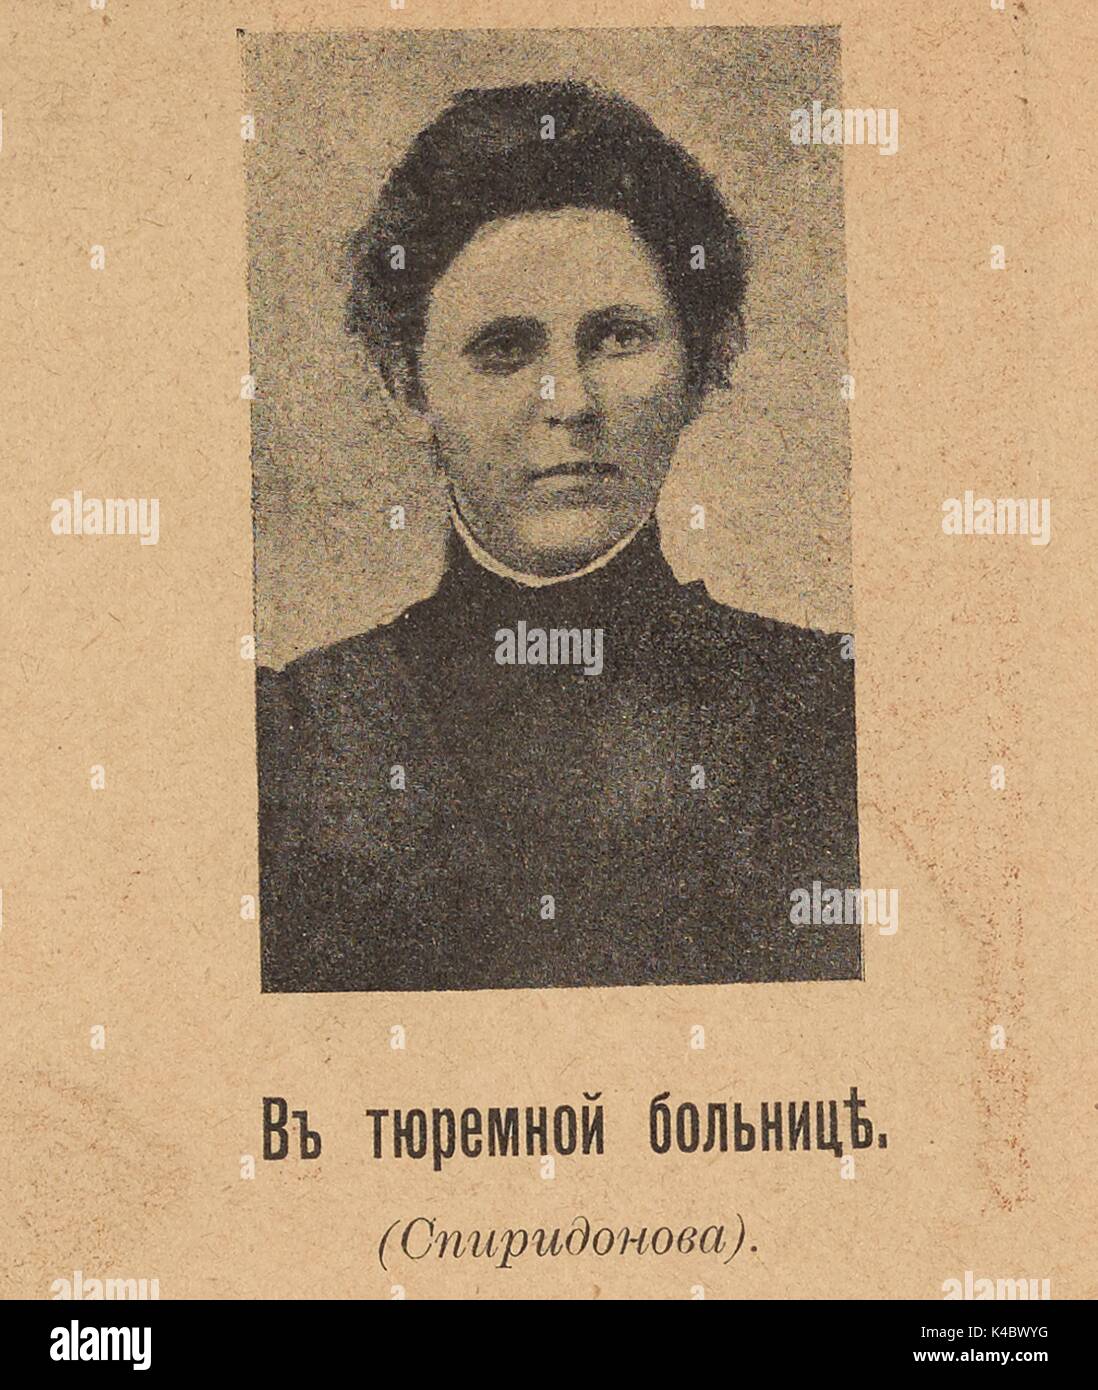 Portrait of Russian socialist revolutionary, Maria Spiridonova, from the Russian satirical journal Bich (Scourge) with text reading 'In a jail's hospital', referring to her imprisonment in the Nerchinsk katorga, a prison complex in Siberia, 1906. Stock Photo